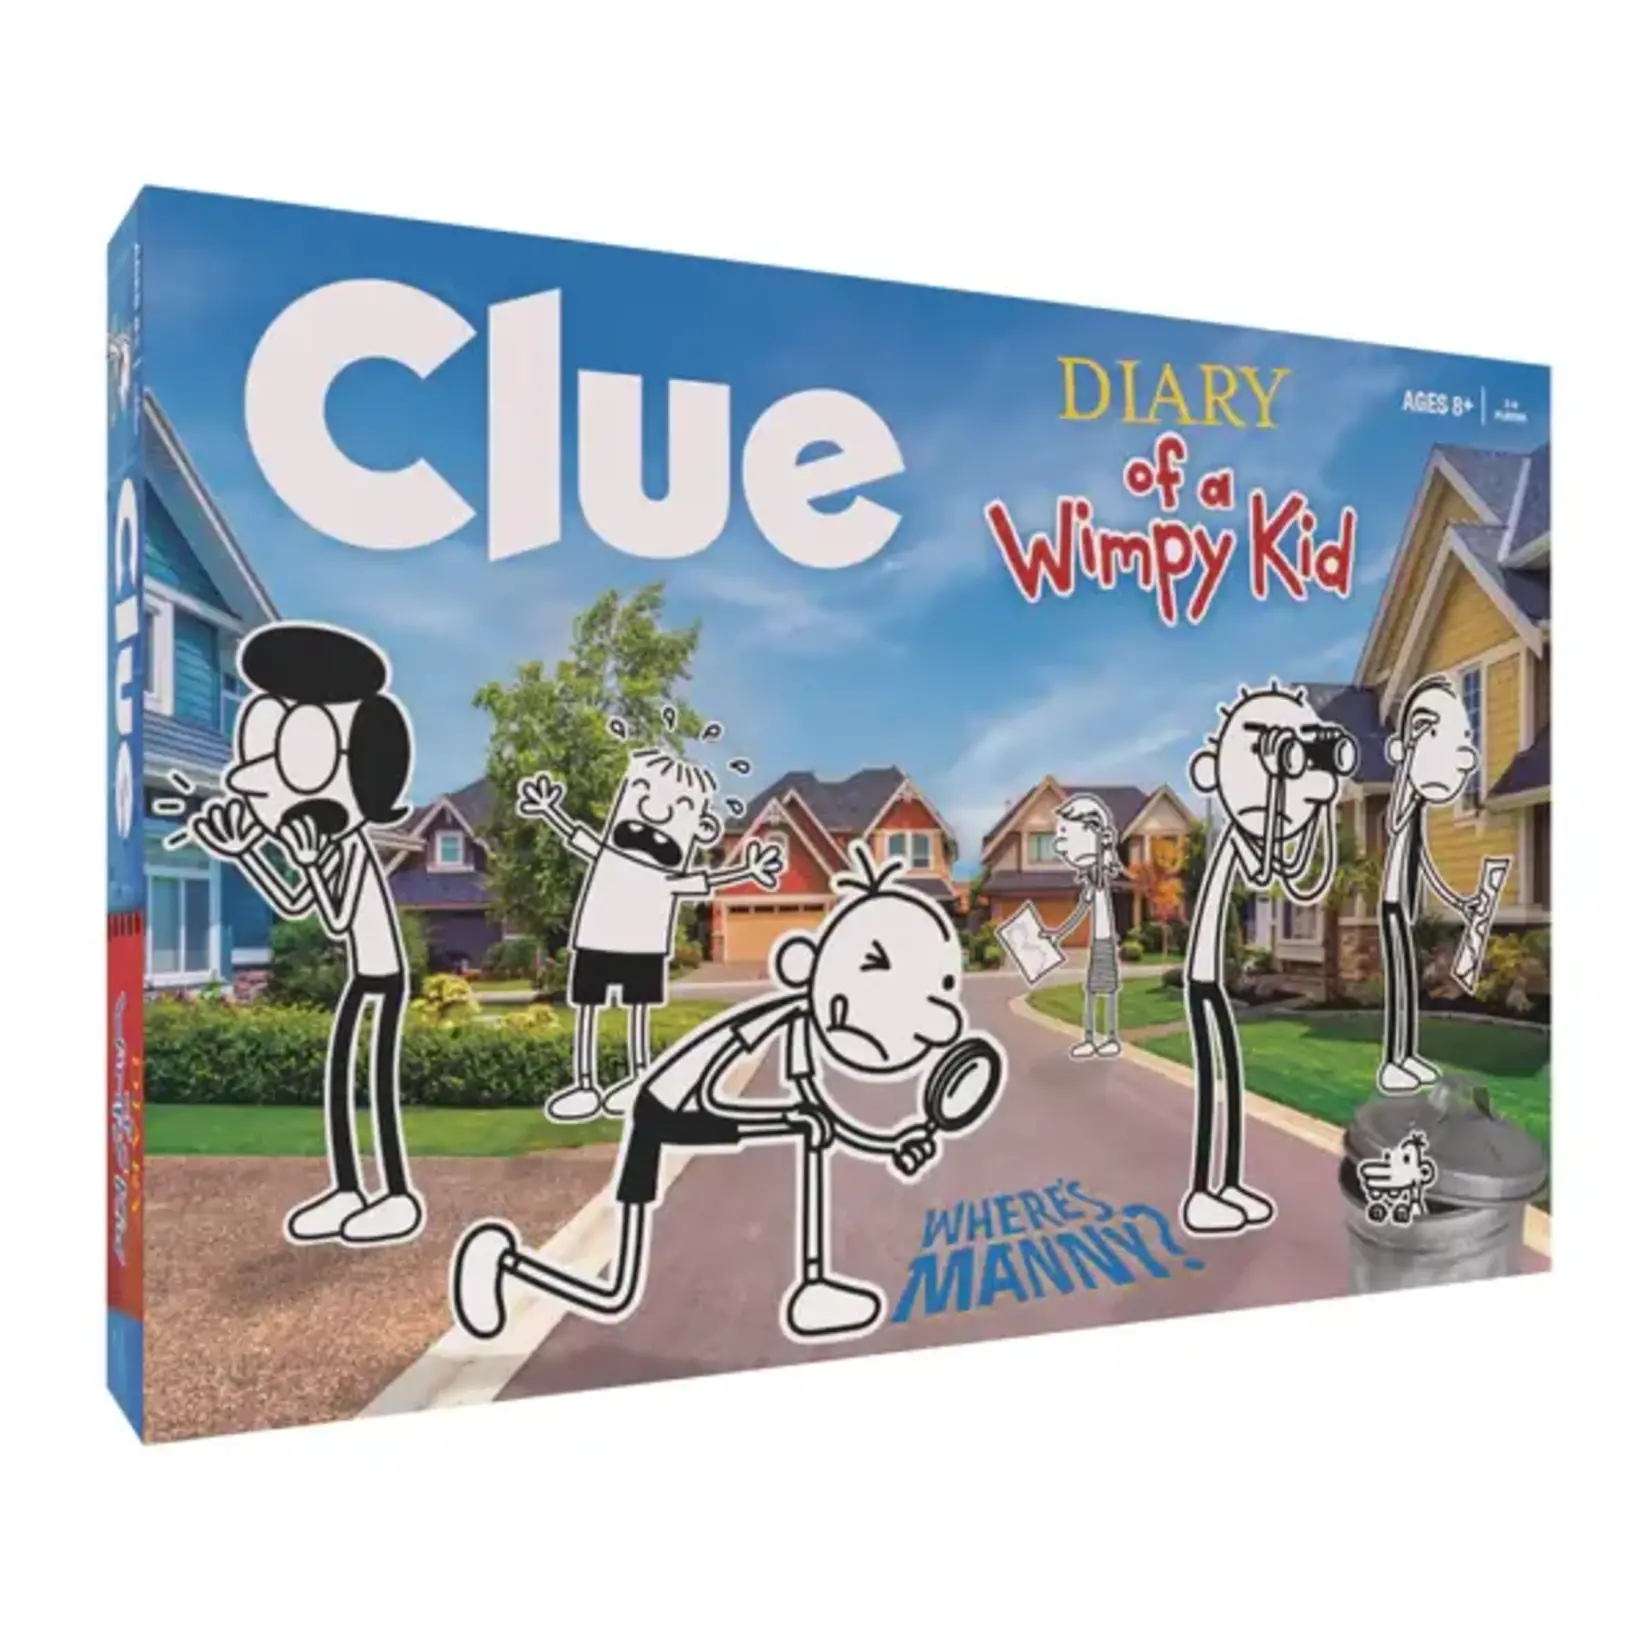 USAopoly Clue: Diary of a Wimpy Kid